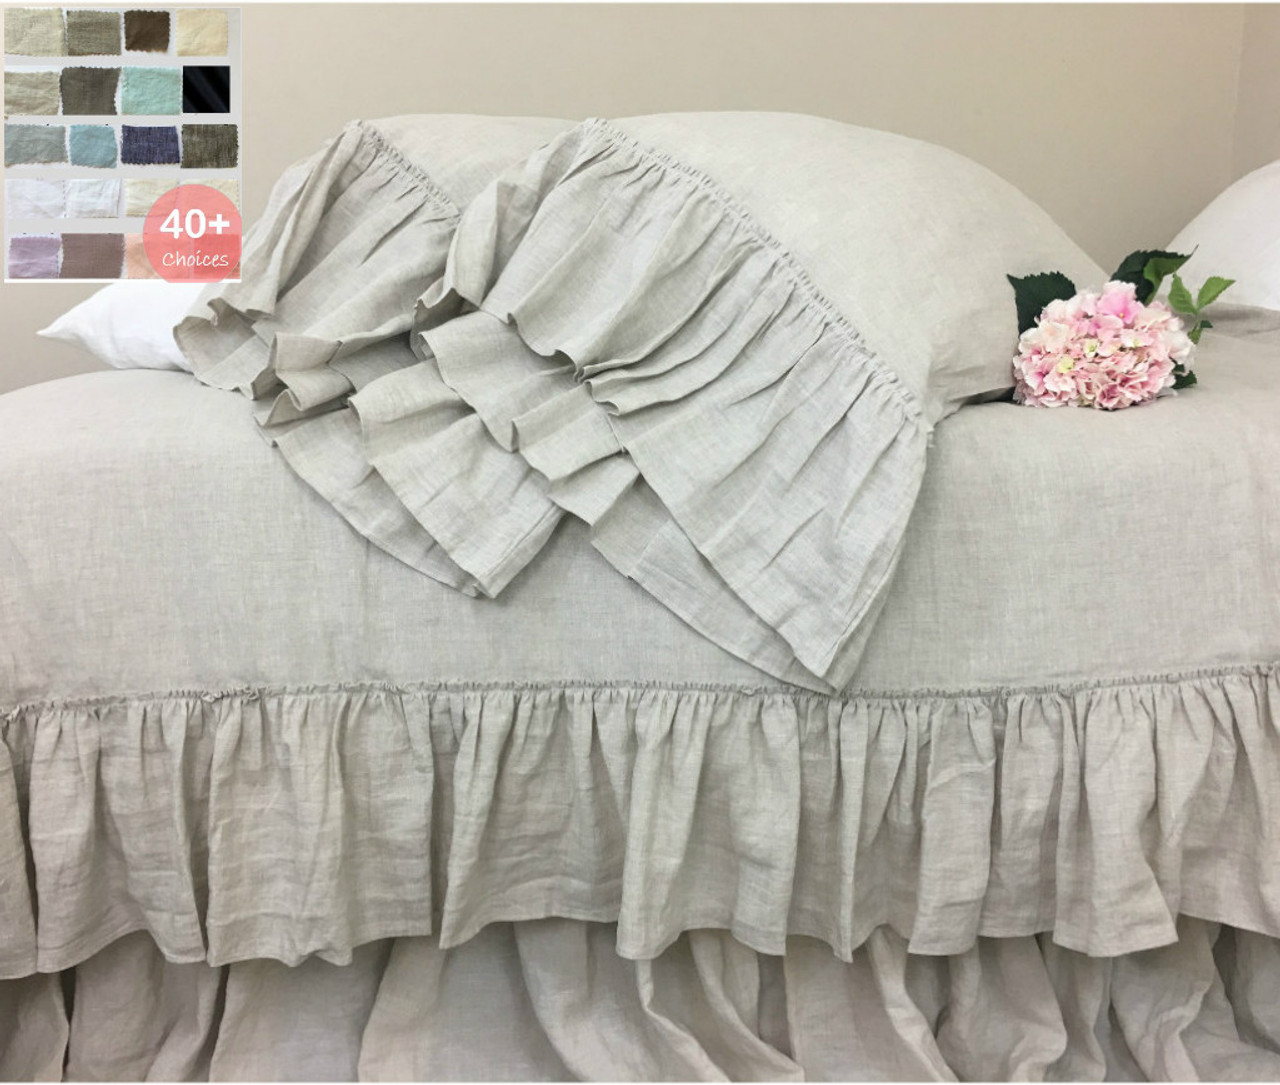 Linen Duvet Cover With Country Mermaid Long Ruffle 40 Fabric